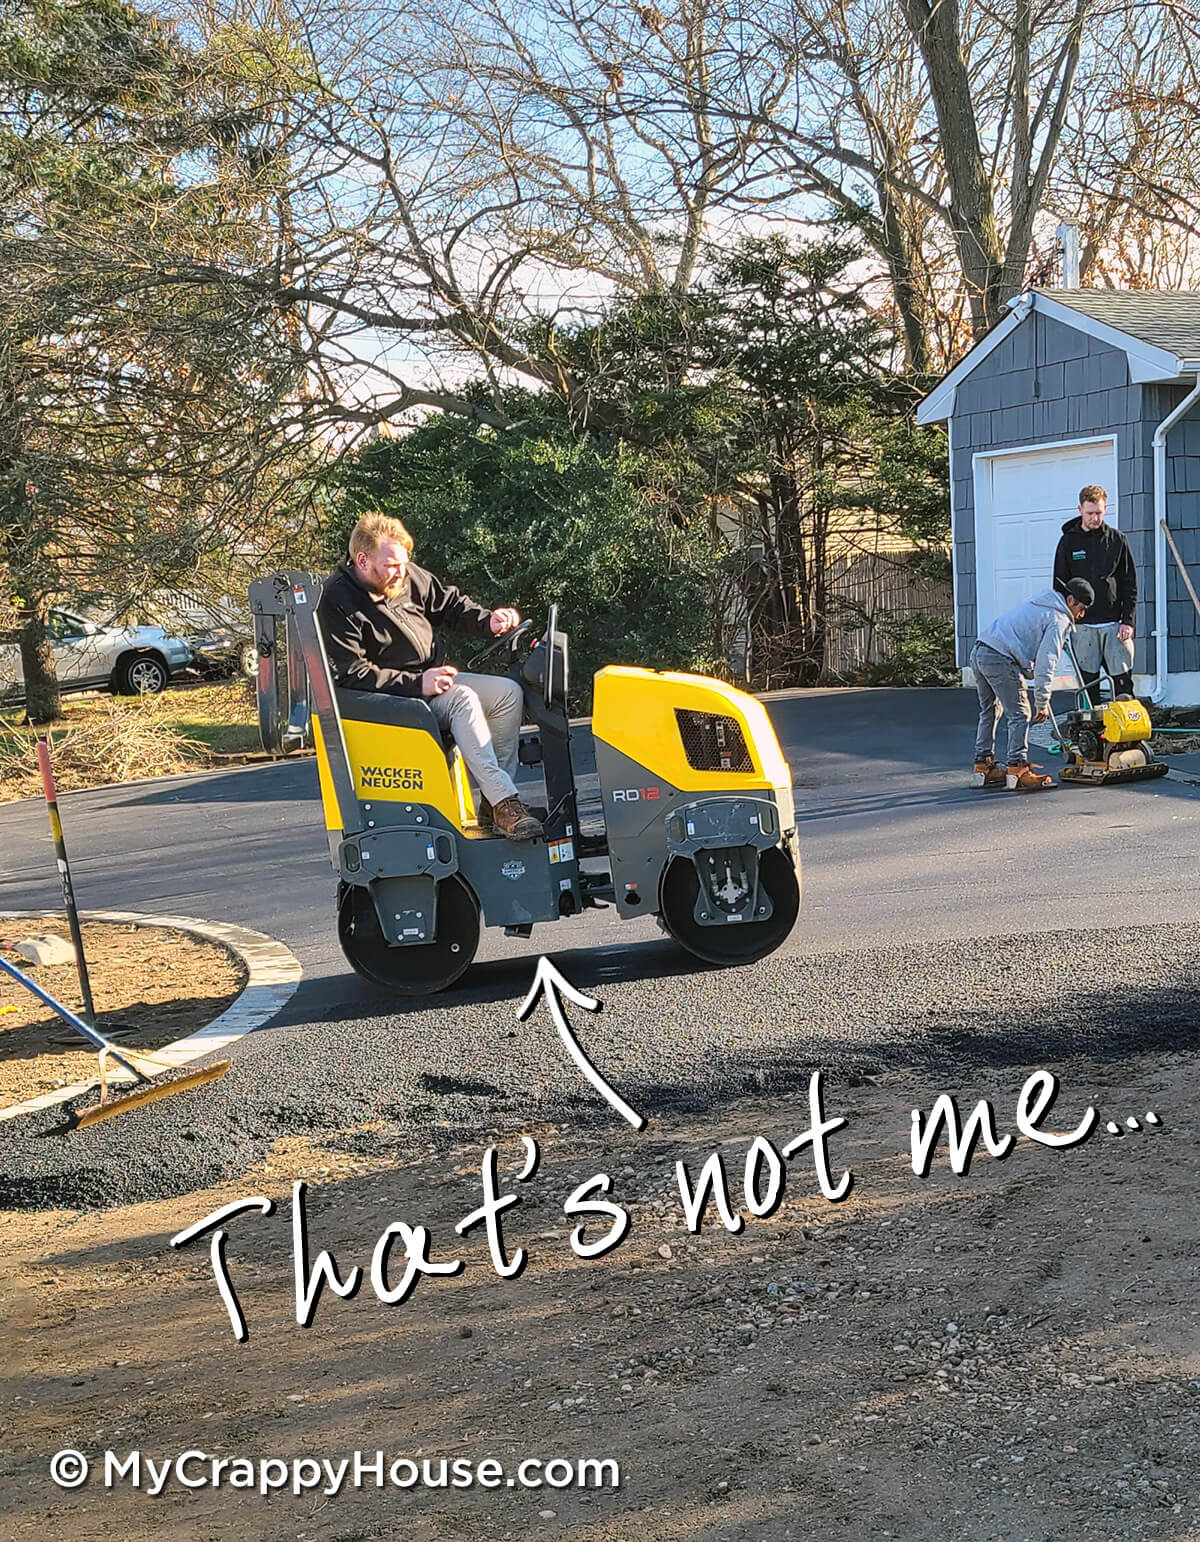 Man steamrolling asphalt driveway that's half installed. Two men in background with other equipment.